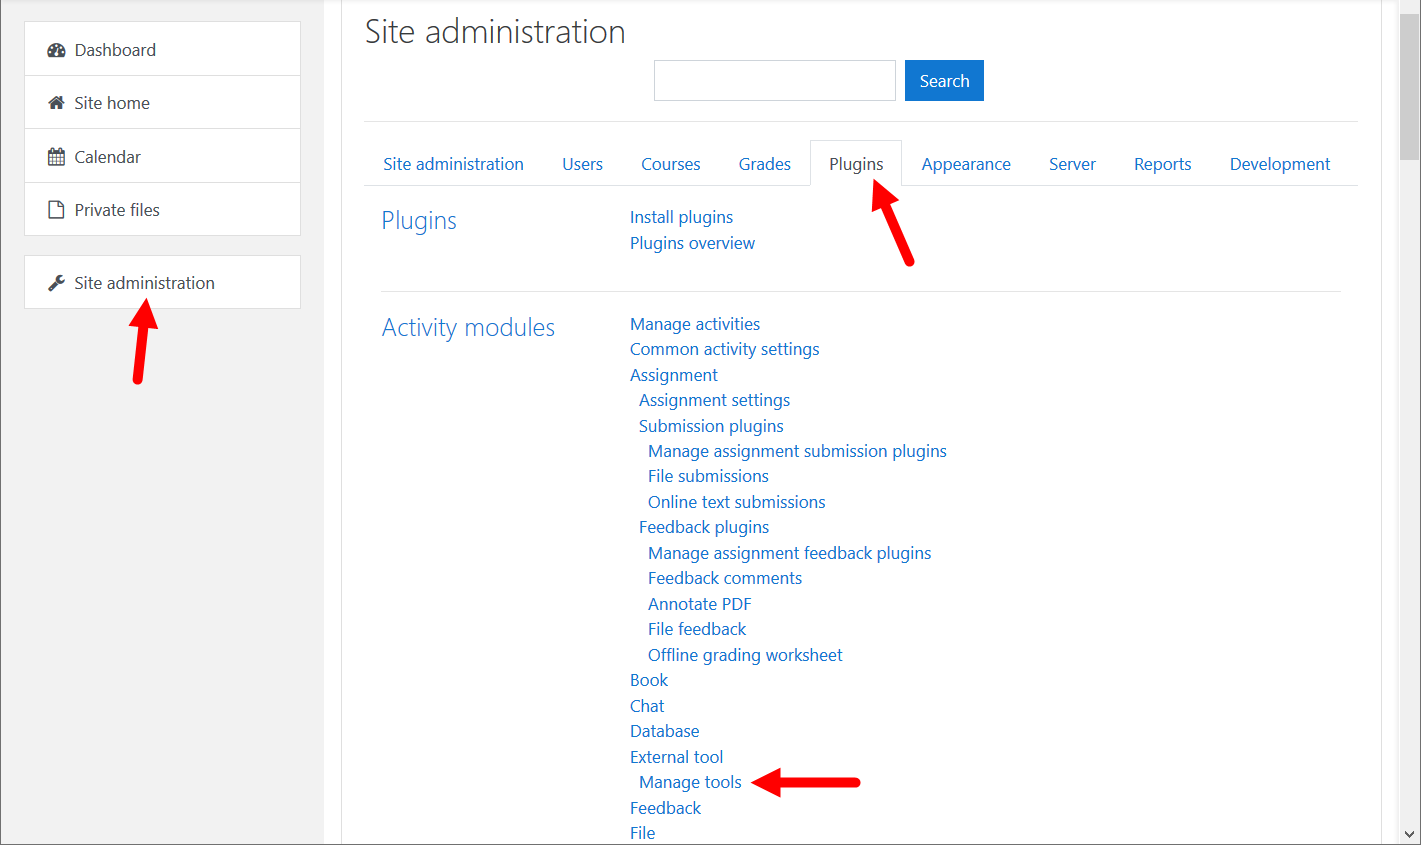 moodle site administration page with navigation to manage external tools shown as described